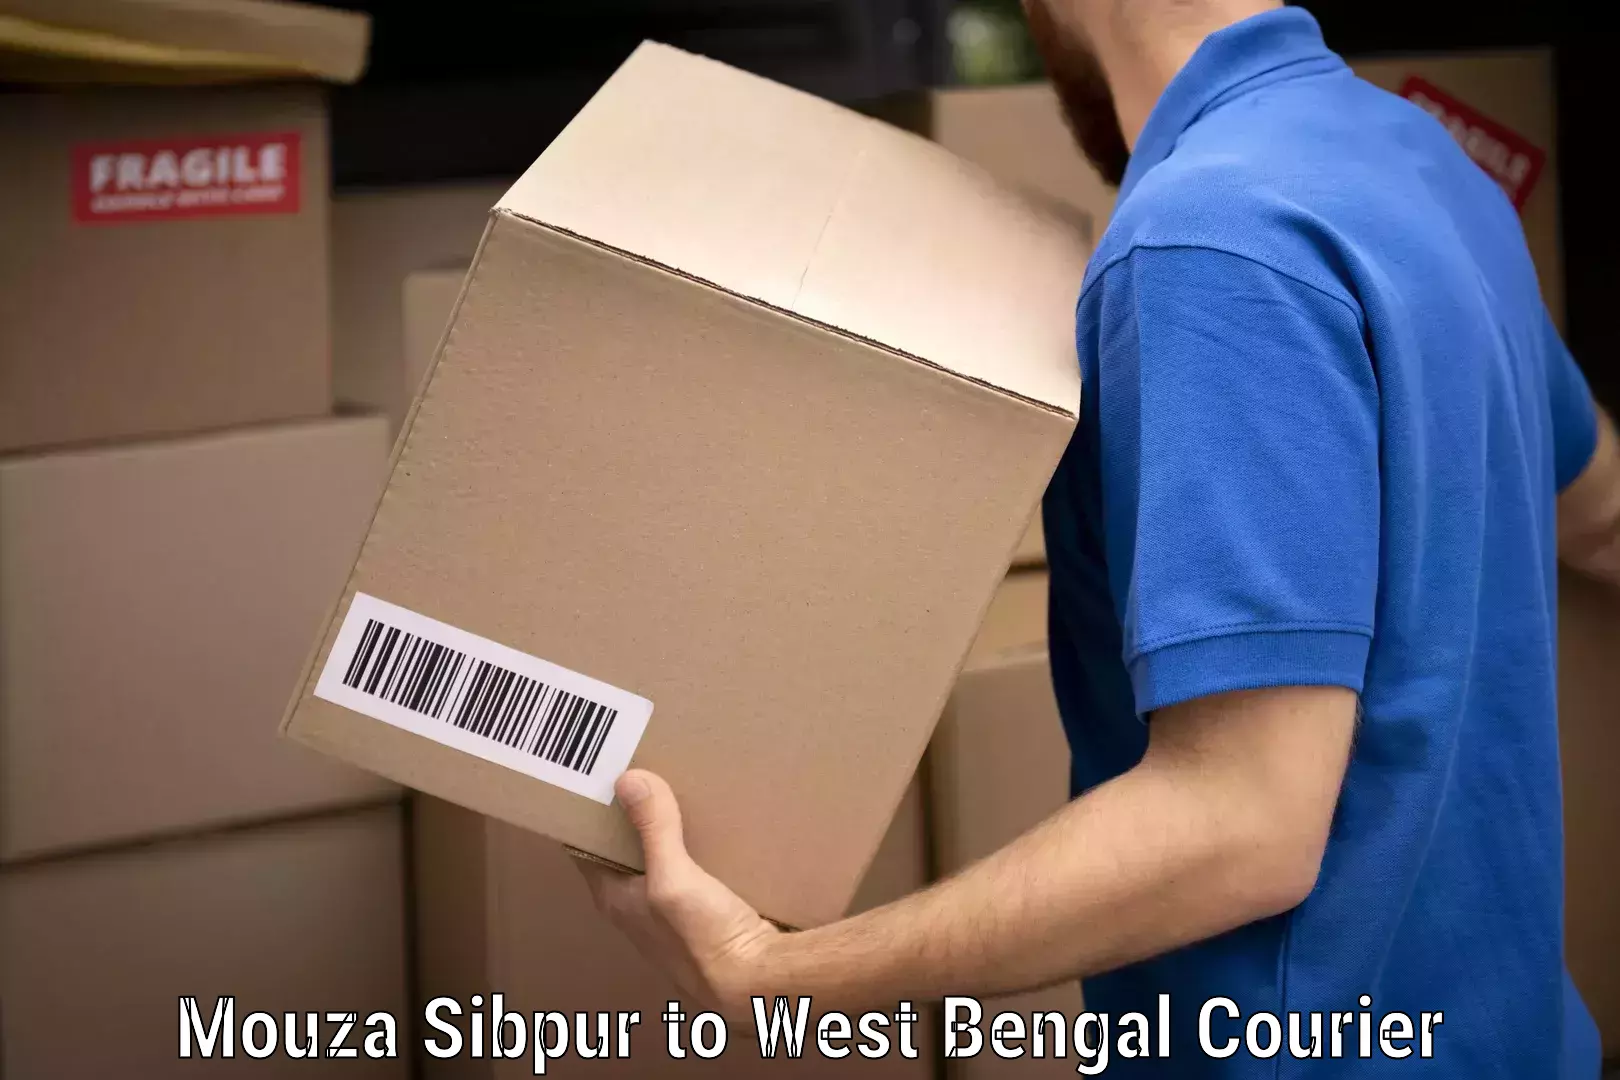 Furniture moving experts Mouza Sibpur to West Bengal